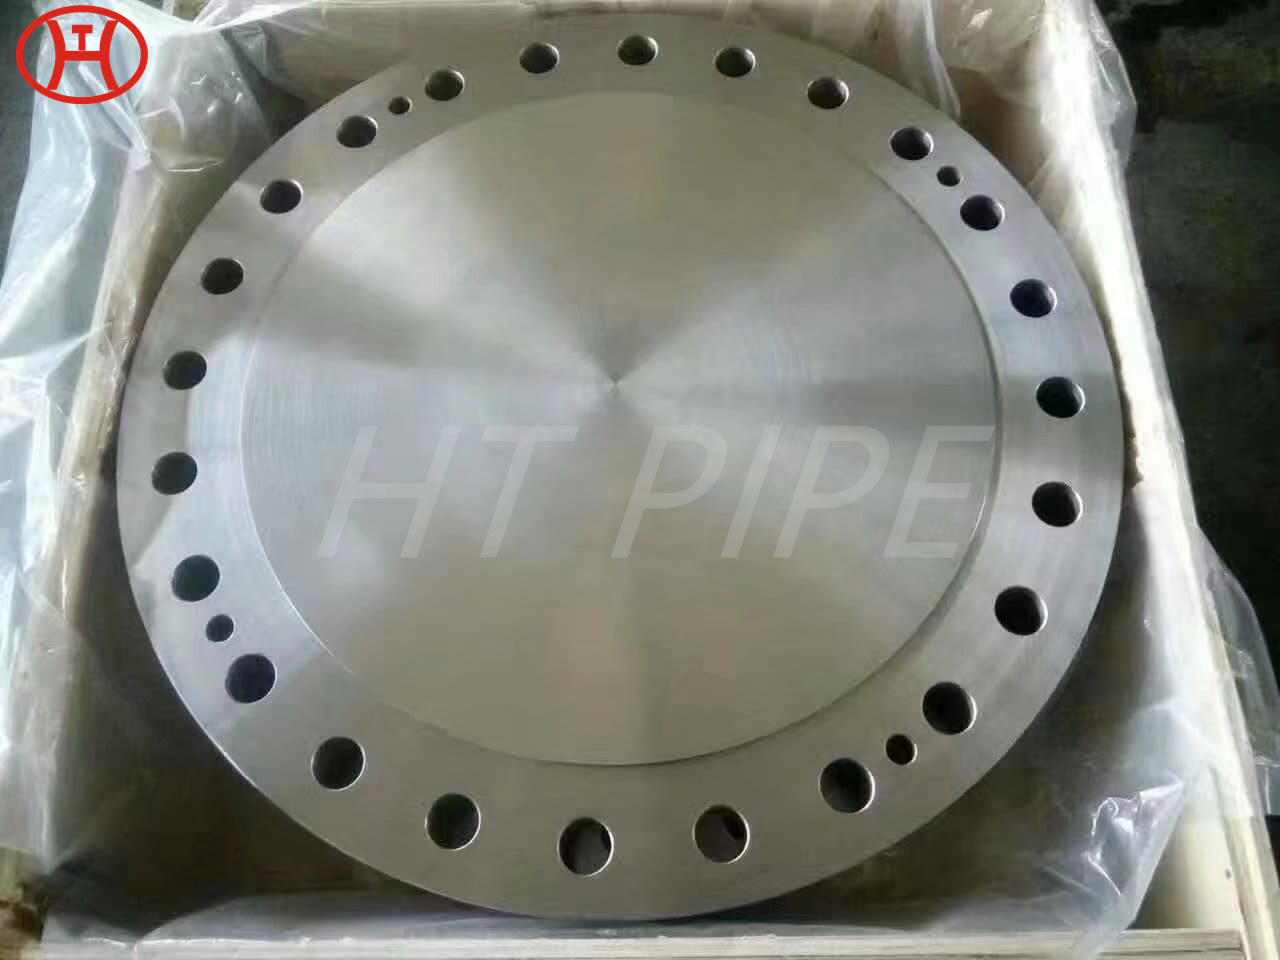 ansi plasitc fittings for protect pipe flanges Inconel 718